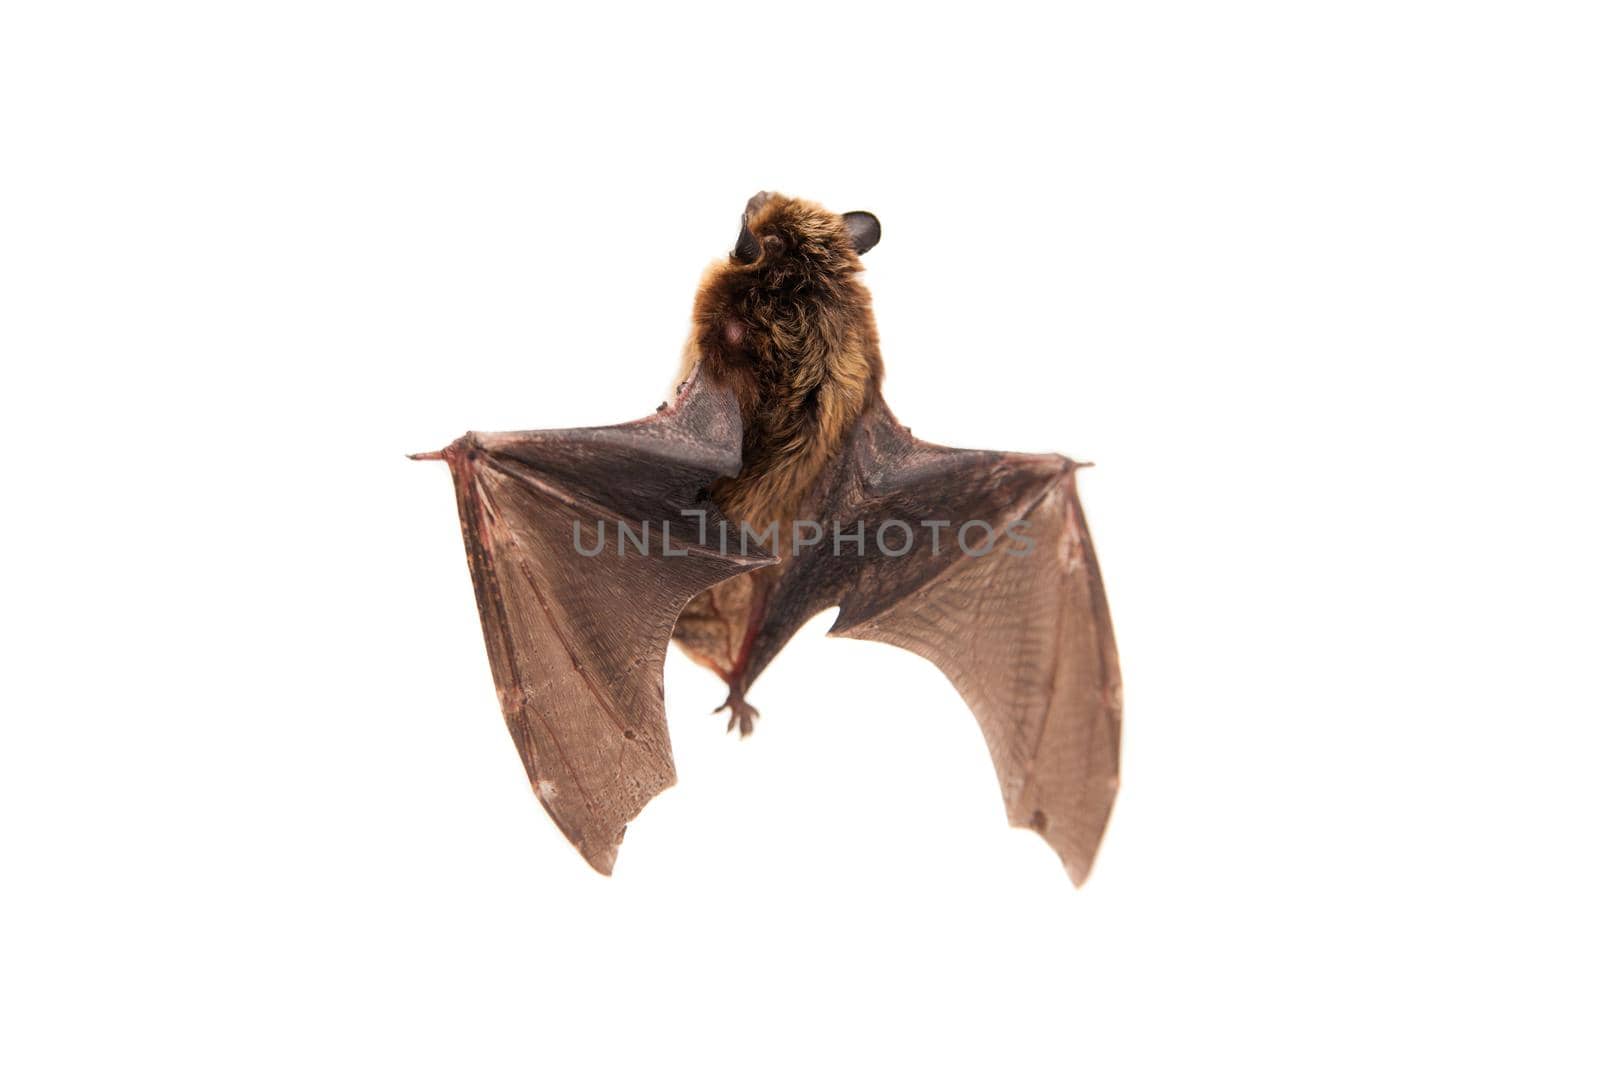 Northern bat on white. by RosaJay